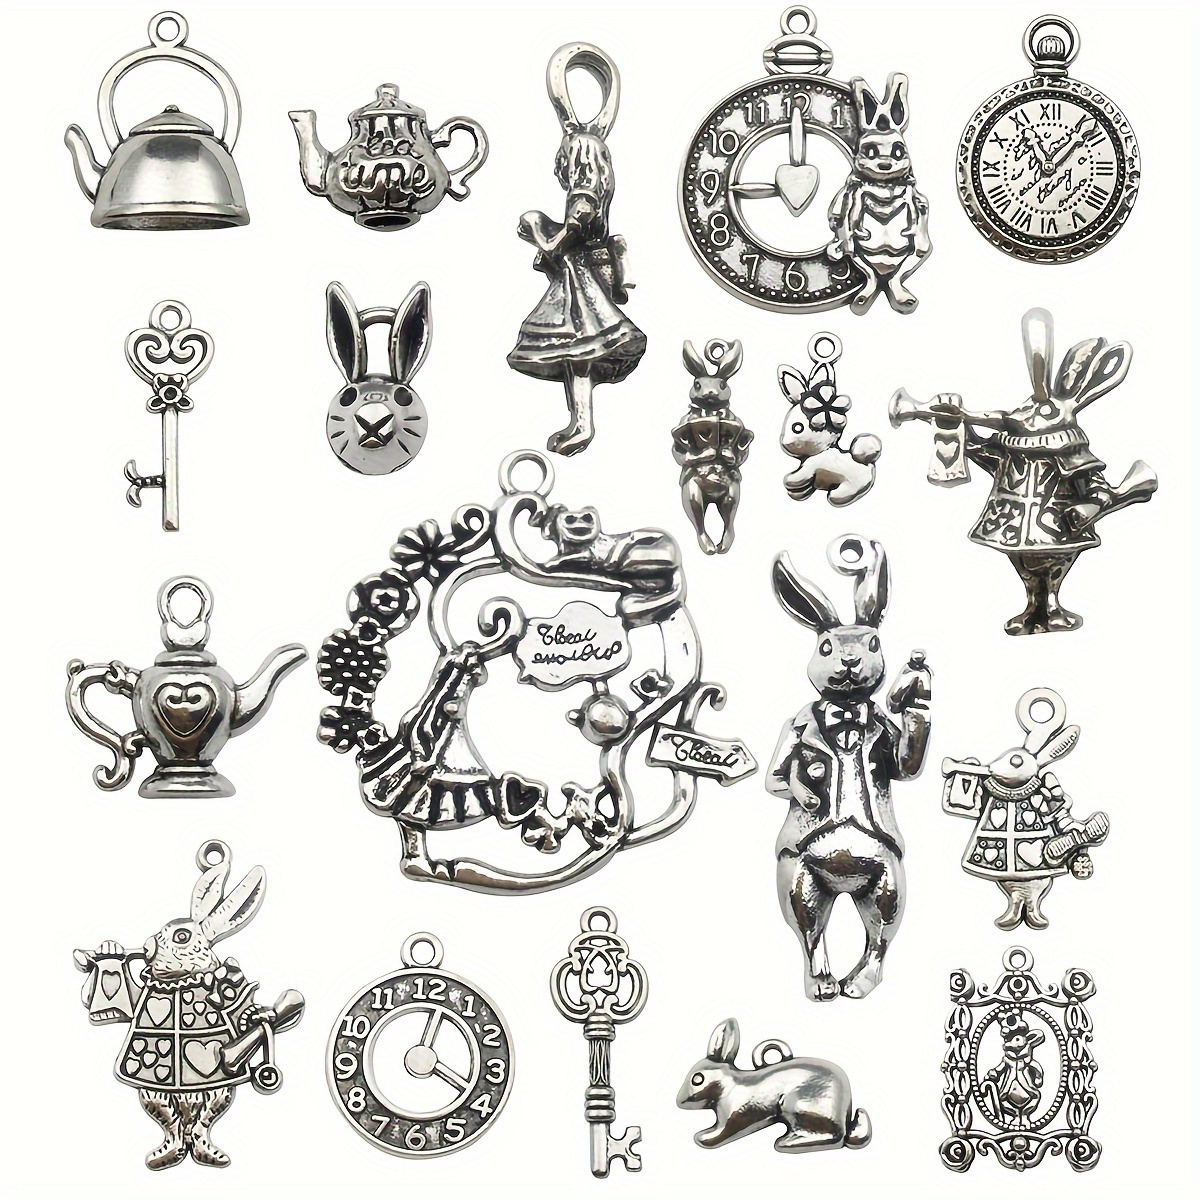 

44pcs Antique Royal Style Pendant Charms, Cute Cartoon Tea Party Theme Charms, For Jewelry Making Diy Supplies